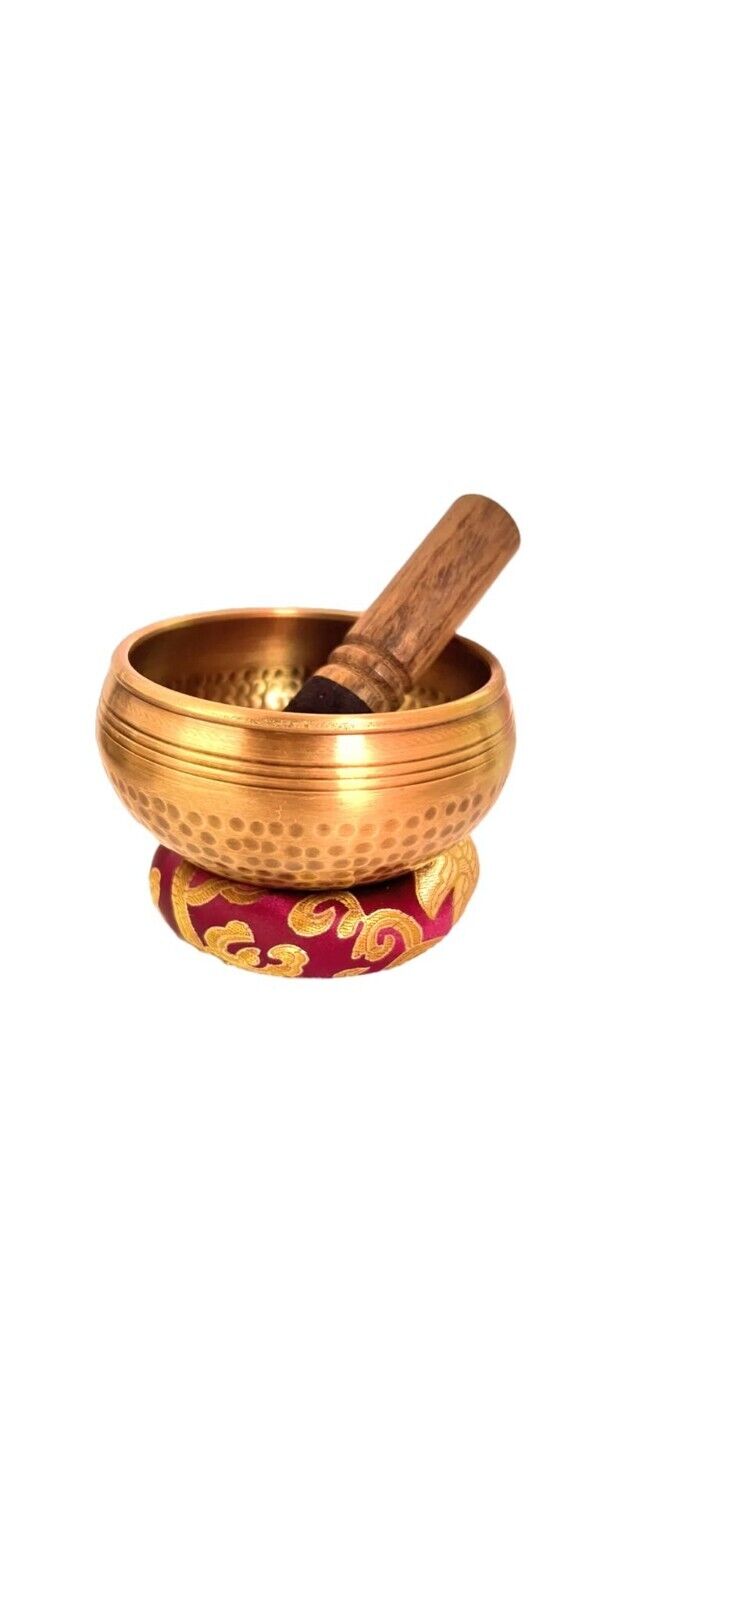 3.5” Tibetan Singing Bowl for Meditation,Healing and Therapy